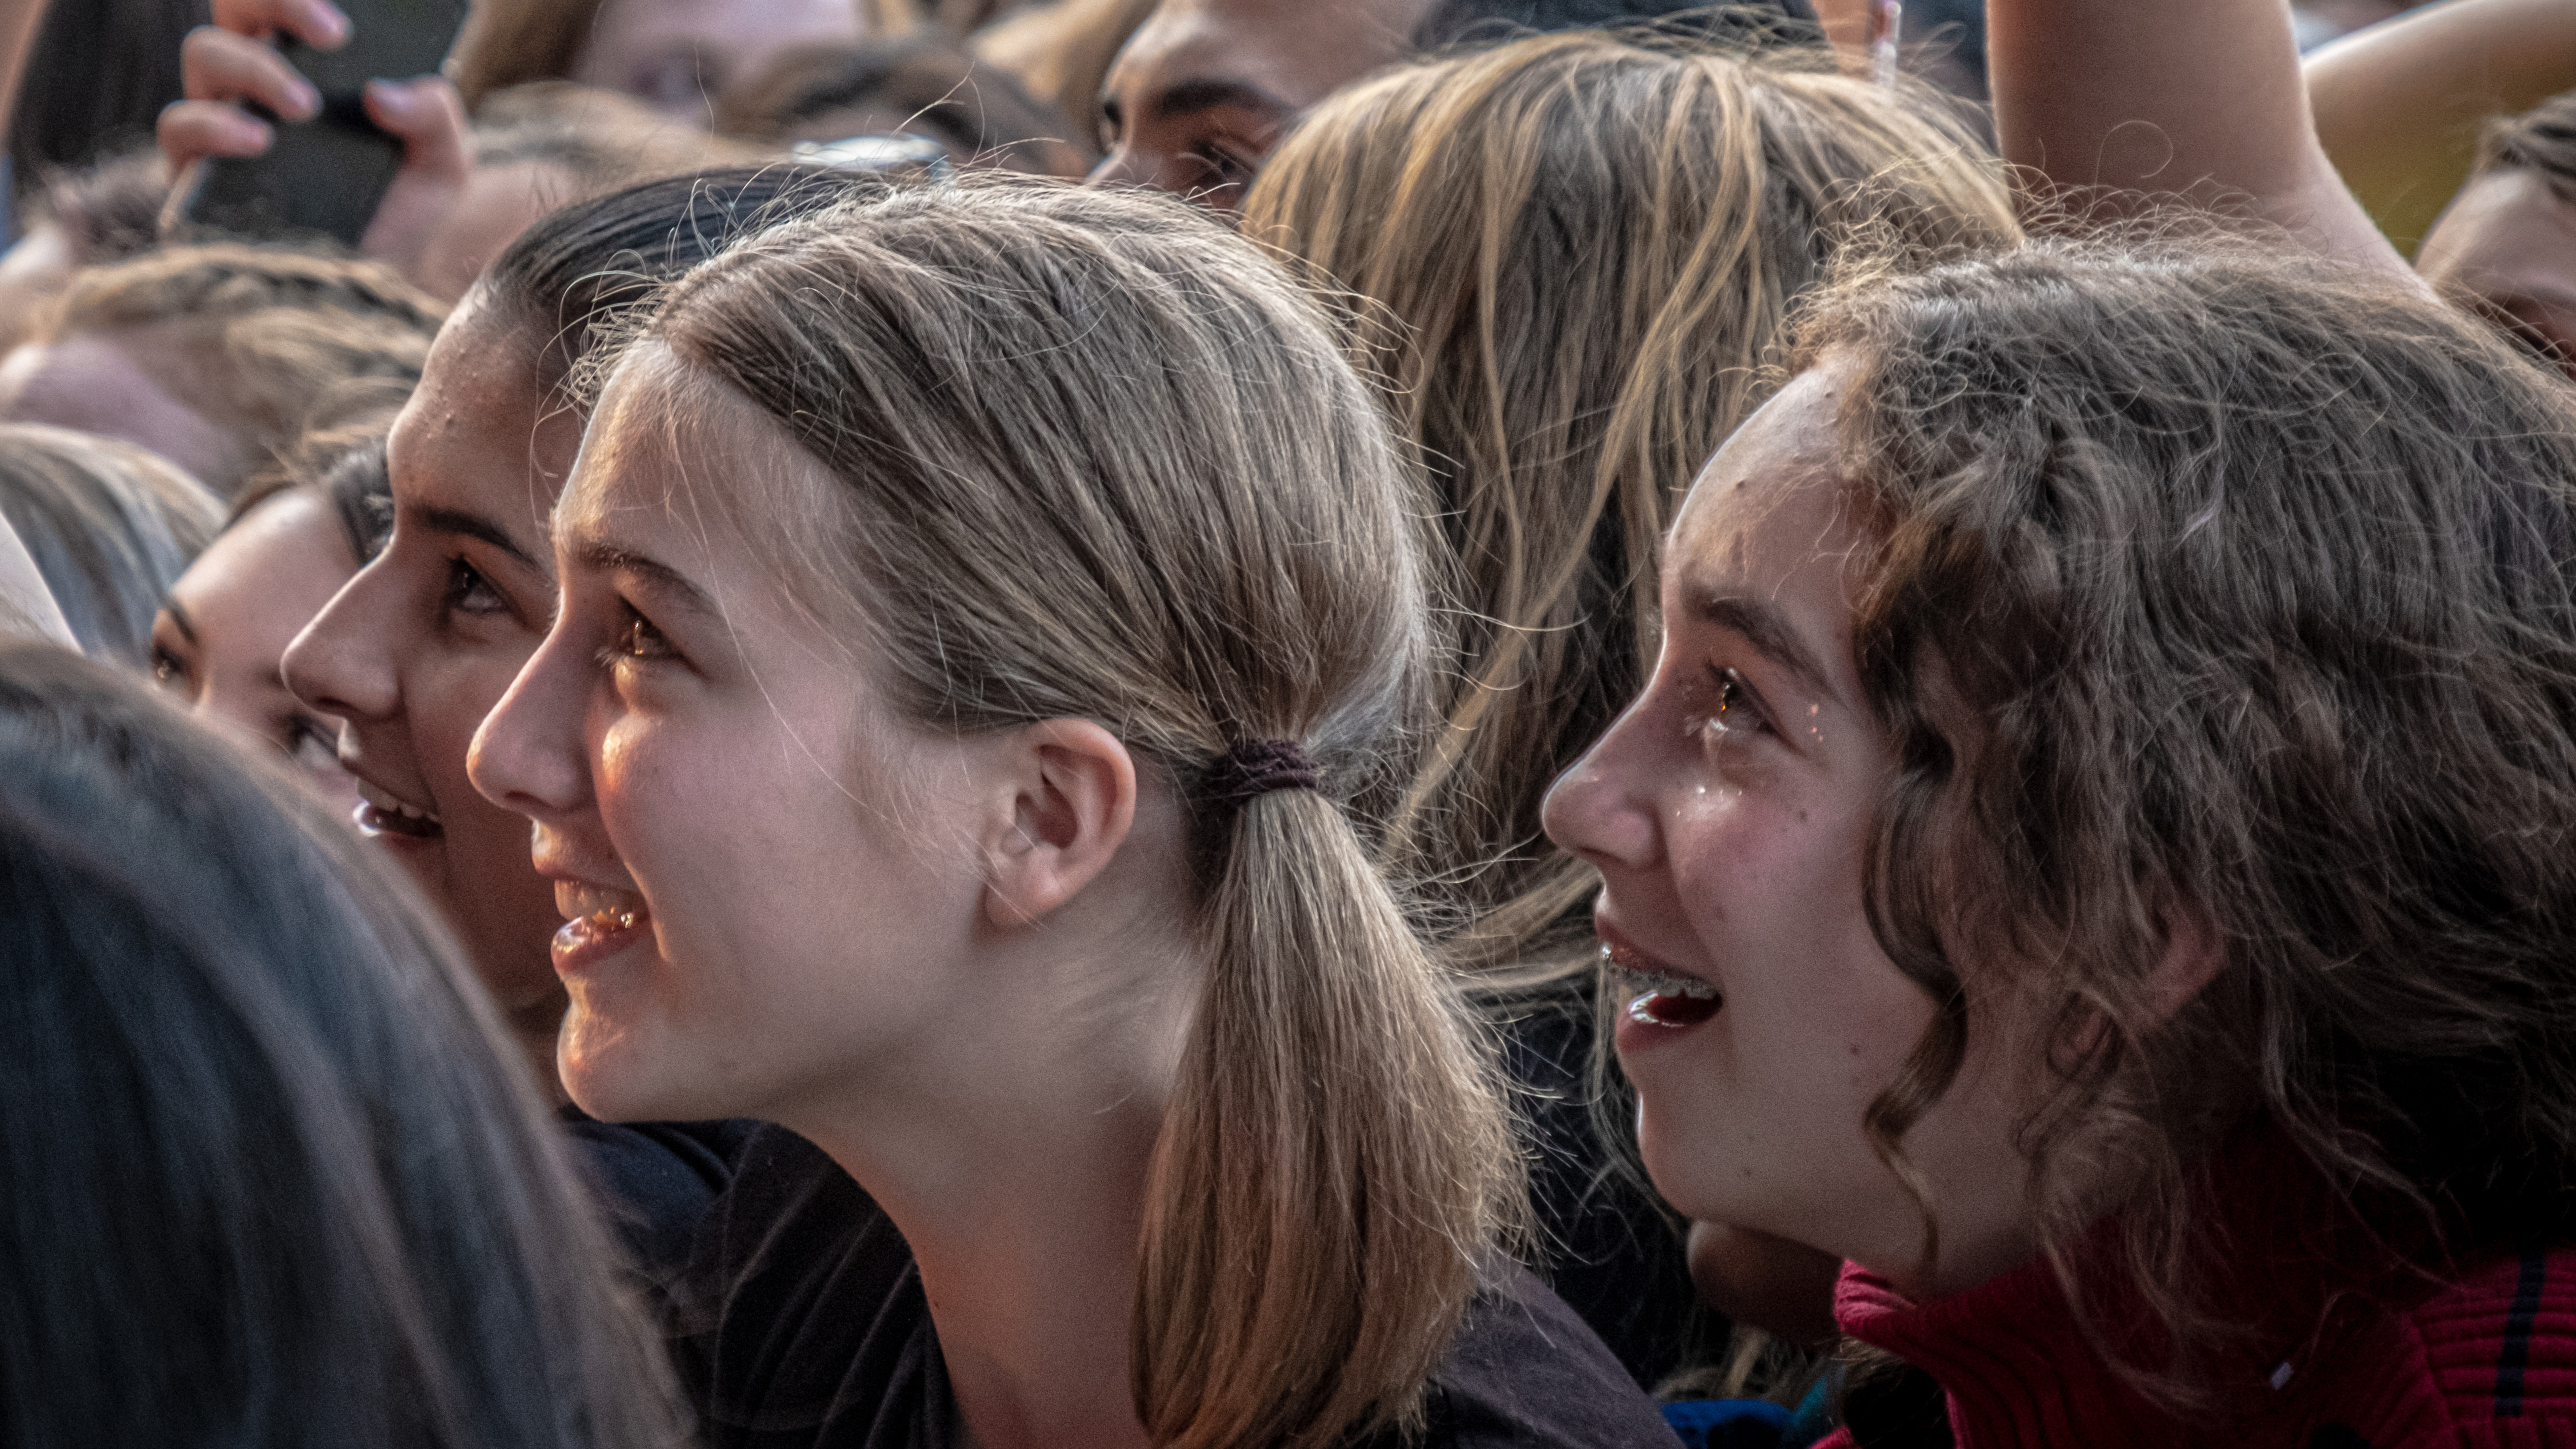 Smiling, emotional teen girls in a concert audience